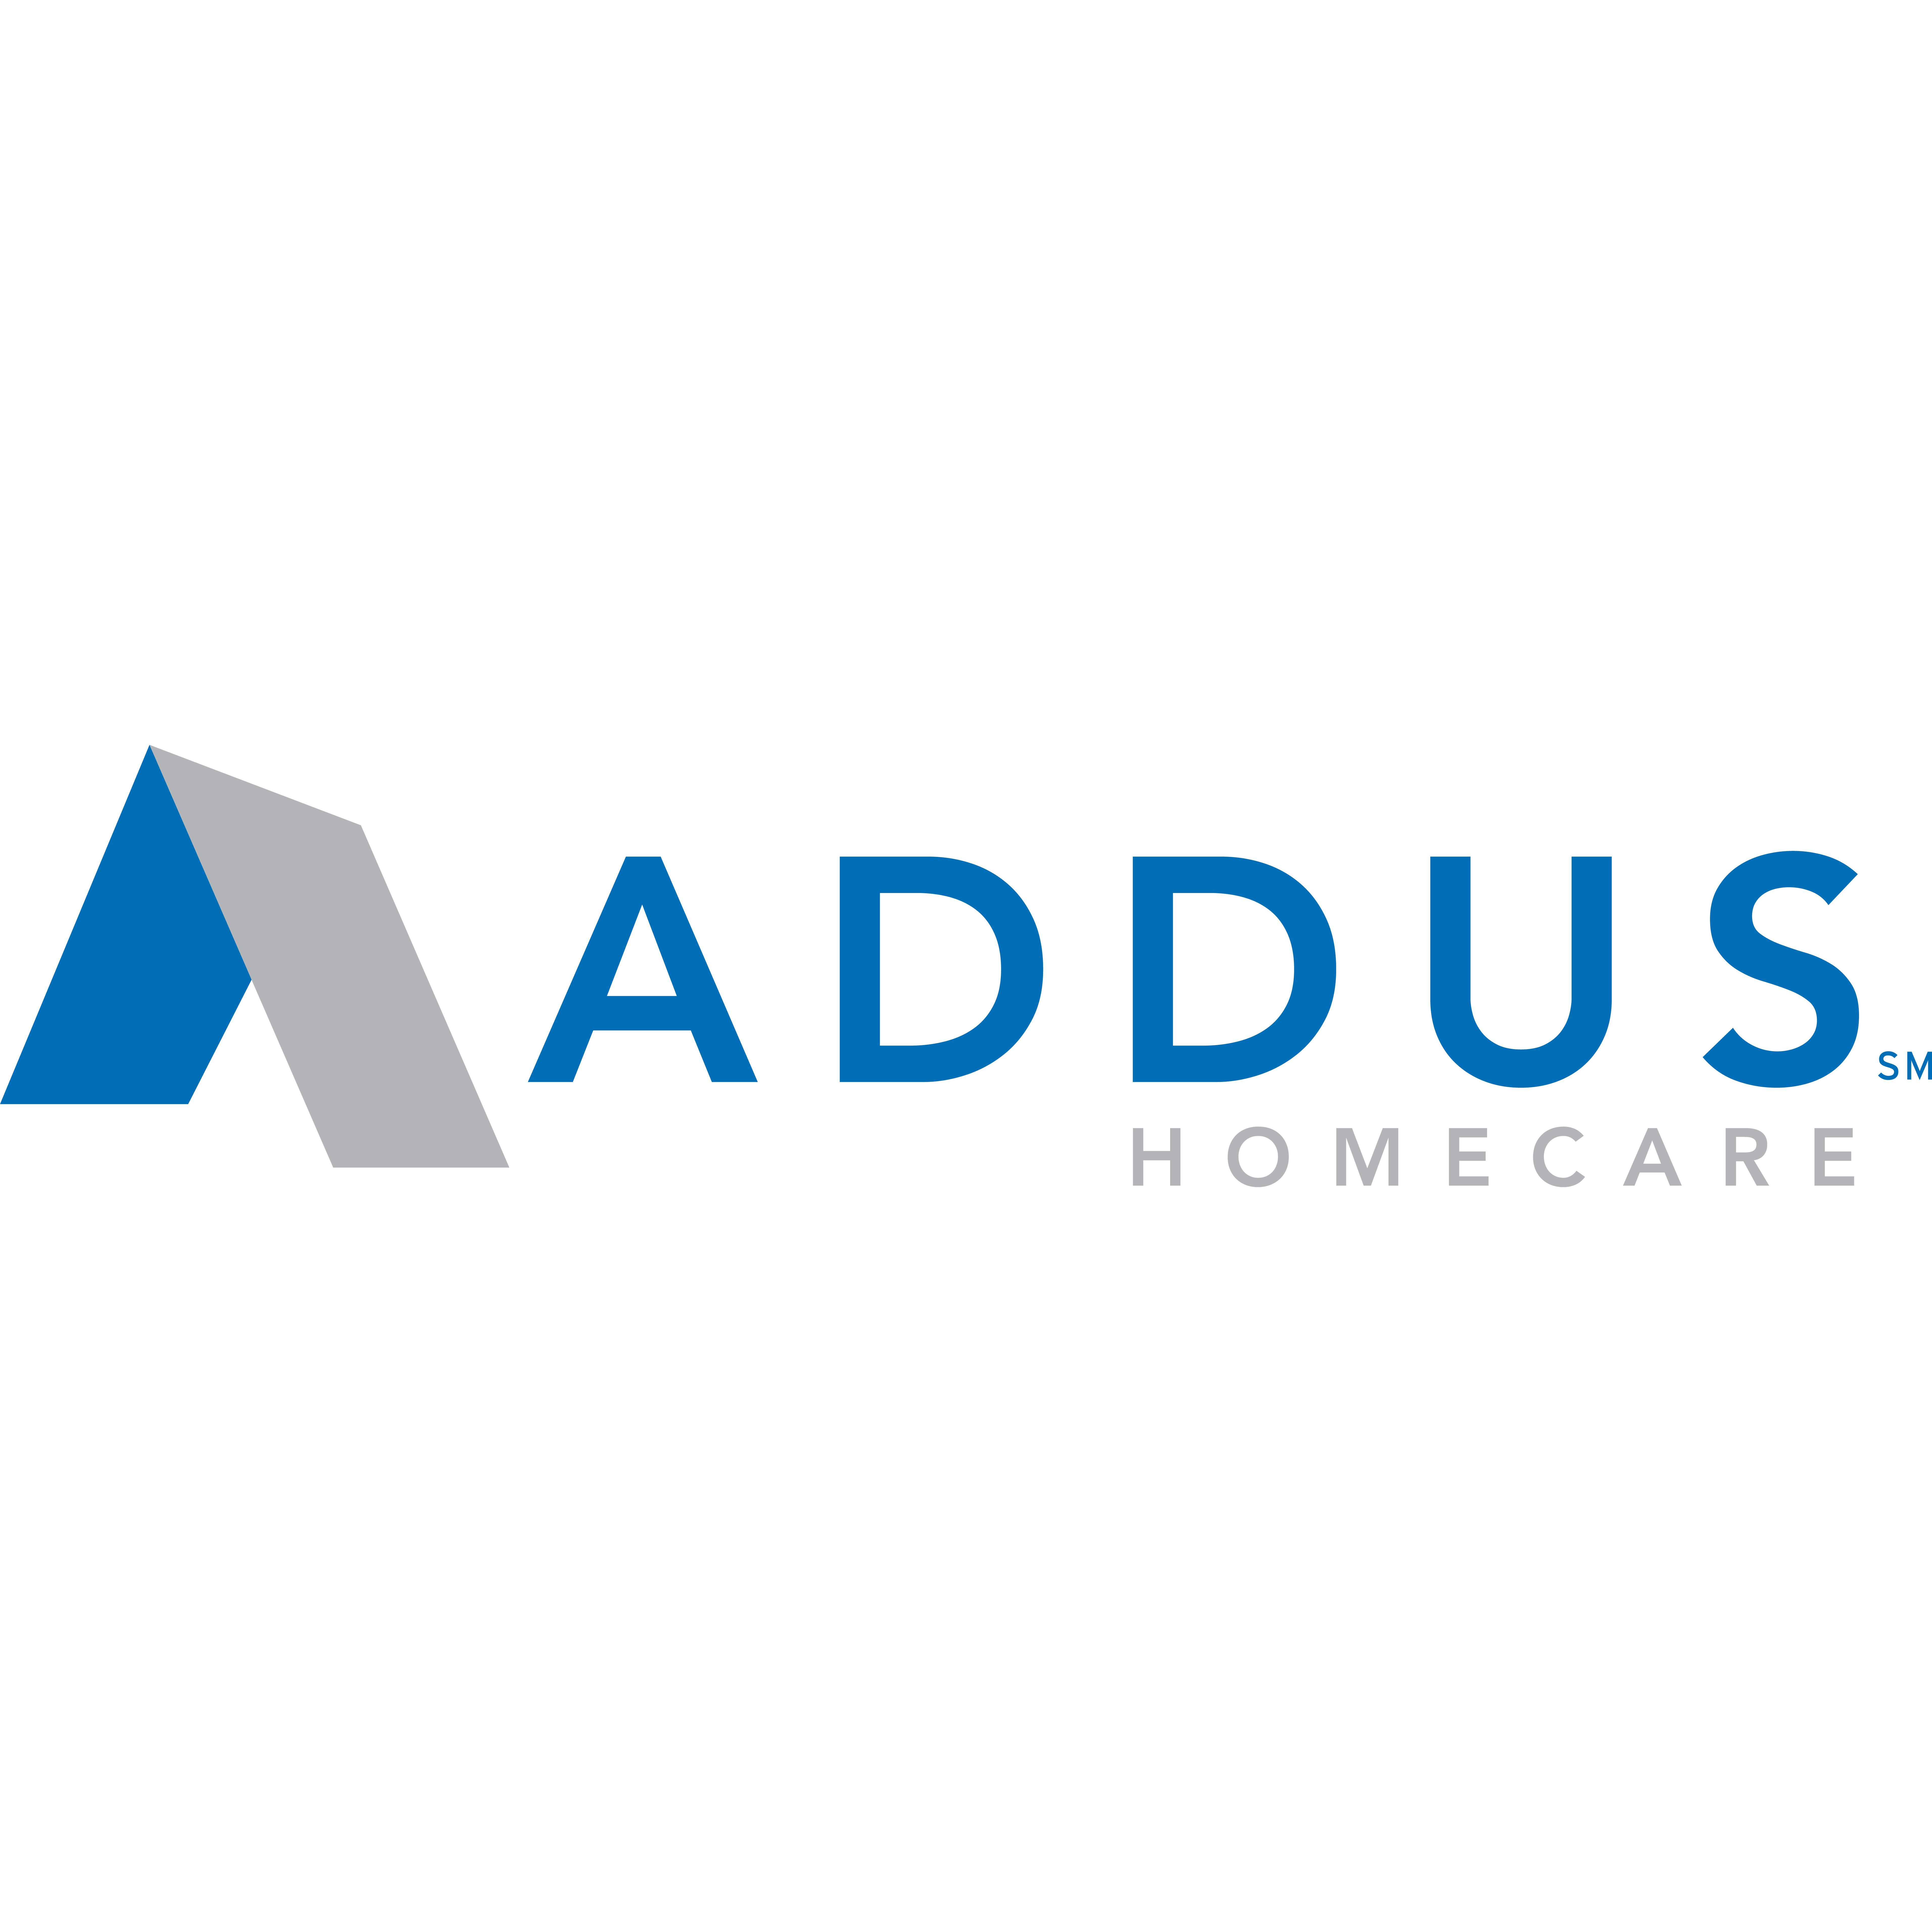 Addus HomeCare 2300 Warrenville Road Downers Grove, IL Home ...